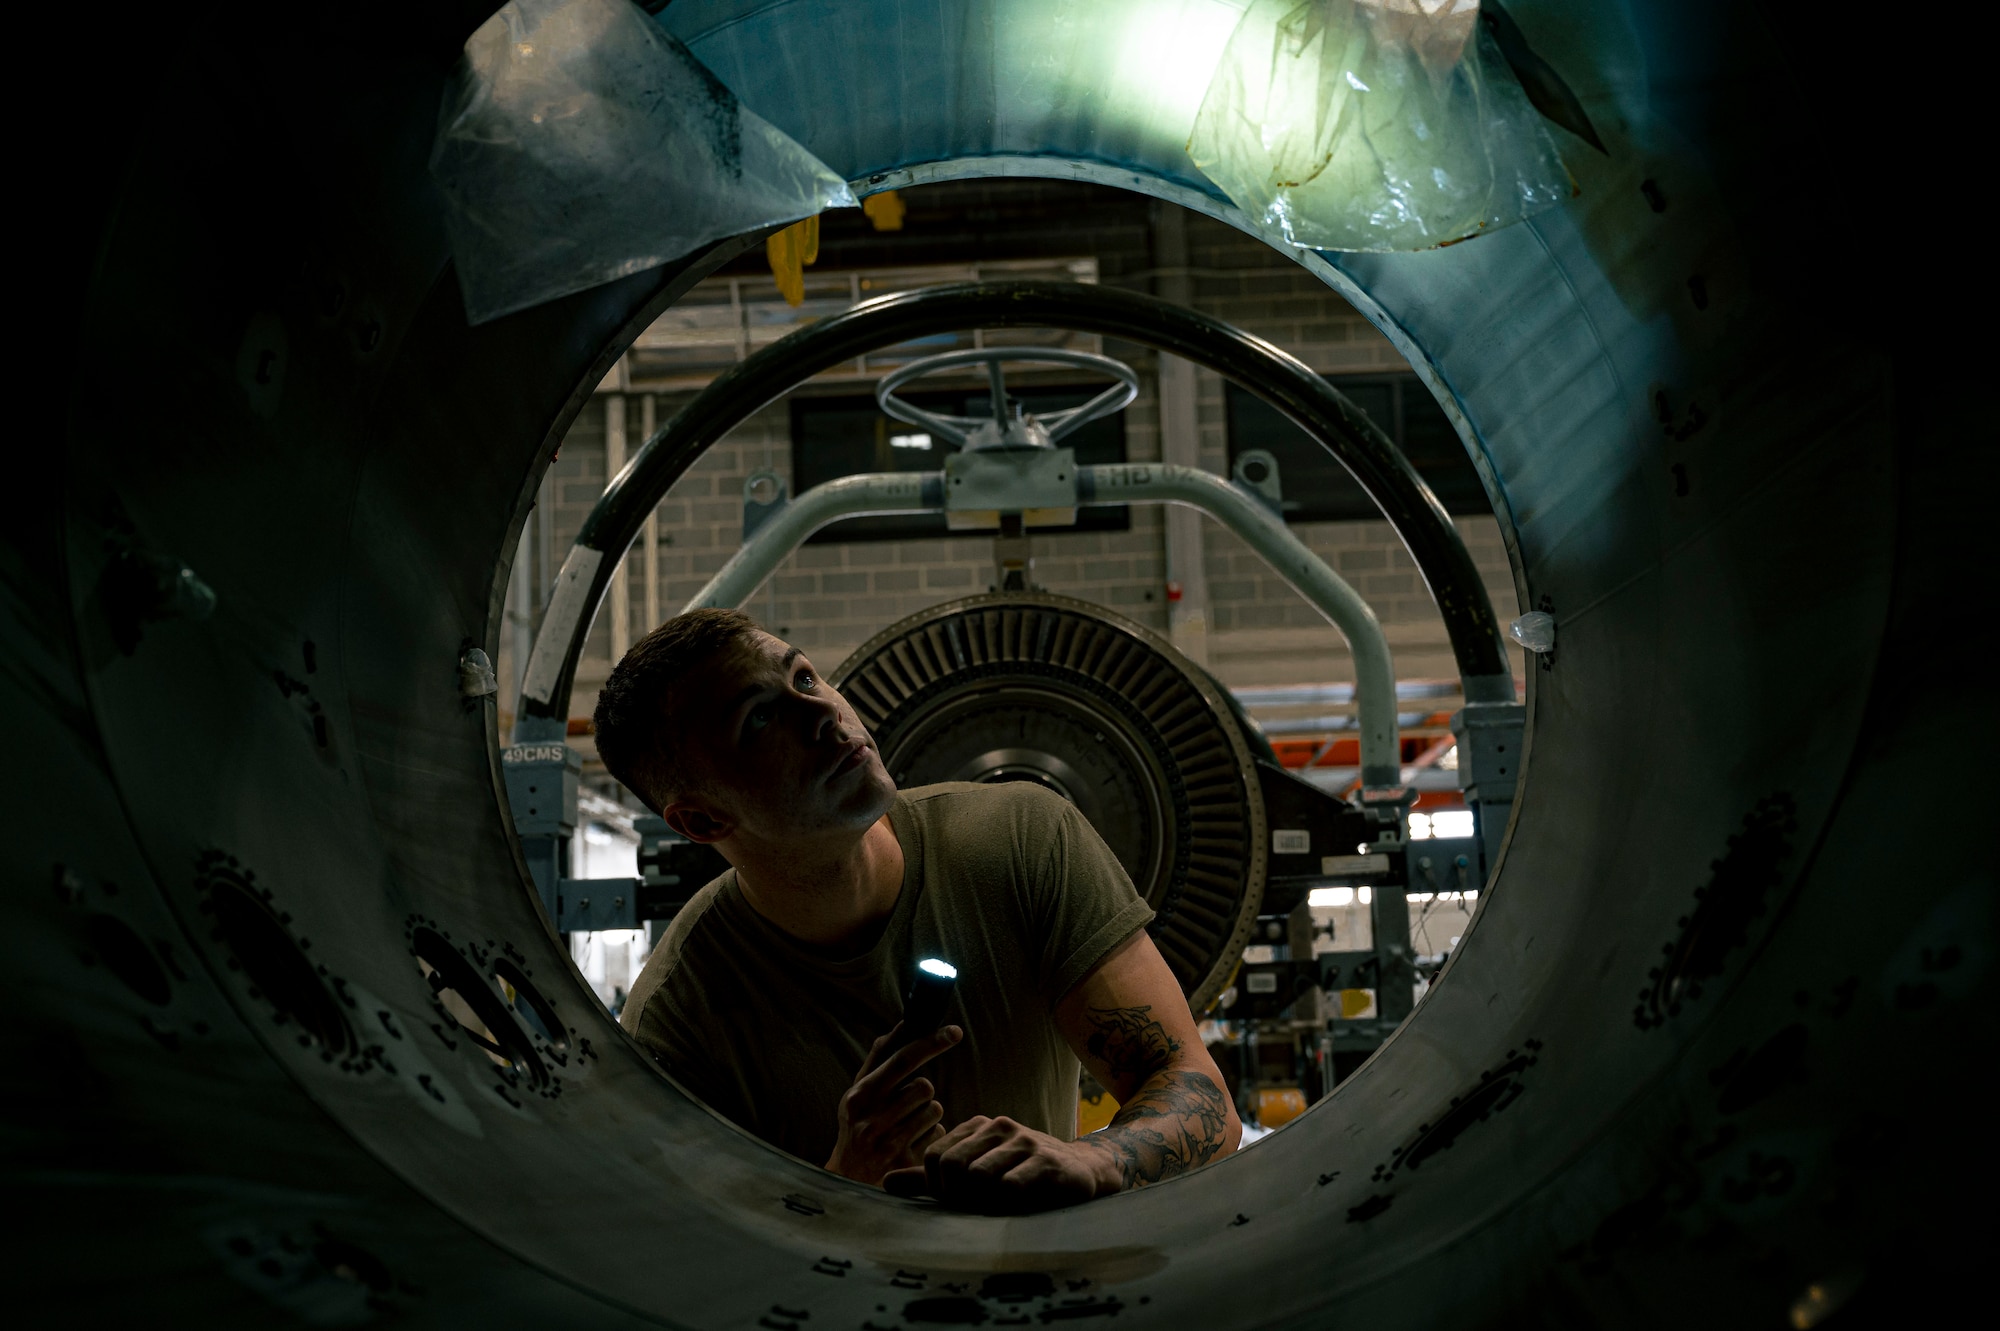 U.S. Air Force Airman 1st Class Anthony Young, 49th Component Maintenance Squadron aerospace propulsion journeyman, inspects the interior of a Pratt and Whitney F100 engine at Holloman Air Force Base, New Mexico, May 3, 2023. The 49th CMS aerospace propulsion shop is responsible for the maintenance of all F-16 Viper engines on base, ensuring they are at maximum efficiency for Holloman’s pilots. (U.S. Air Force photo by Airman 1st Class Isaiah Pedrazzini)